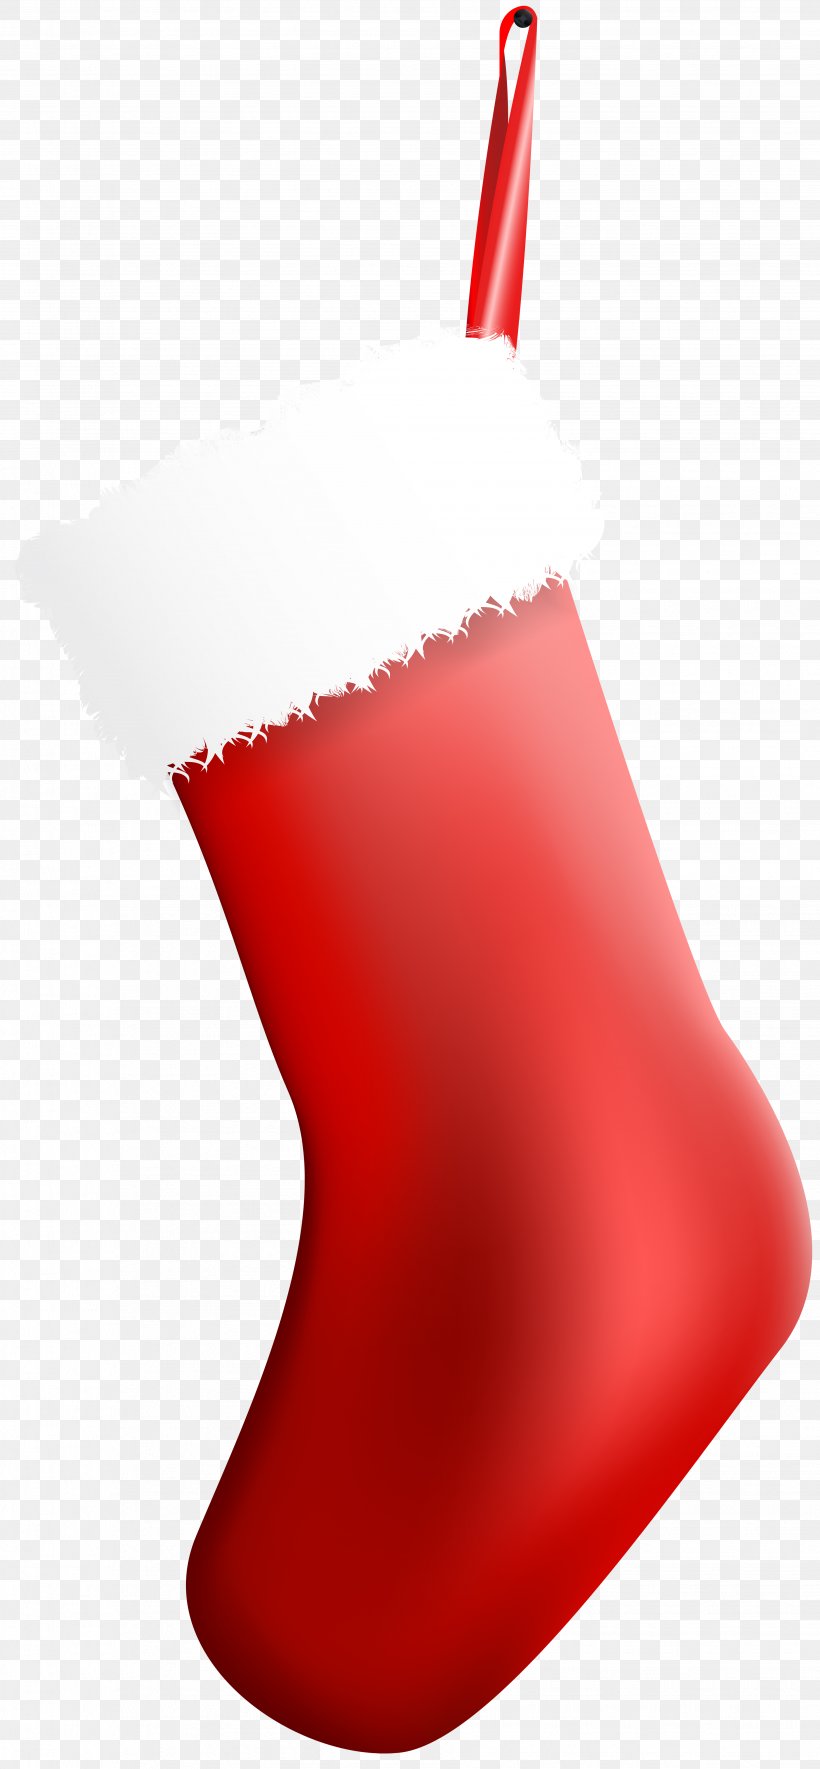 Christmas Stockings Christmas Decoration Clip Art, PNG, 3707x8000px, Christmas Stockings, Christmas, Christmas Decoration, Christmas Ornament, Christmas Stocking Download Free